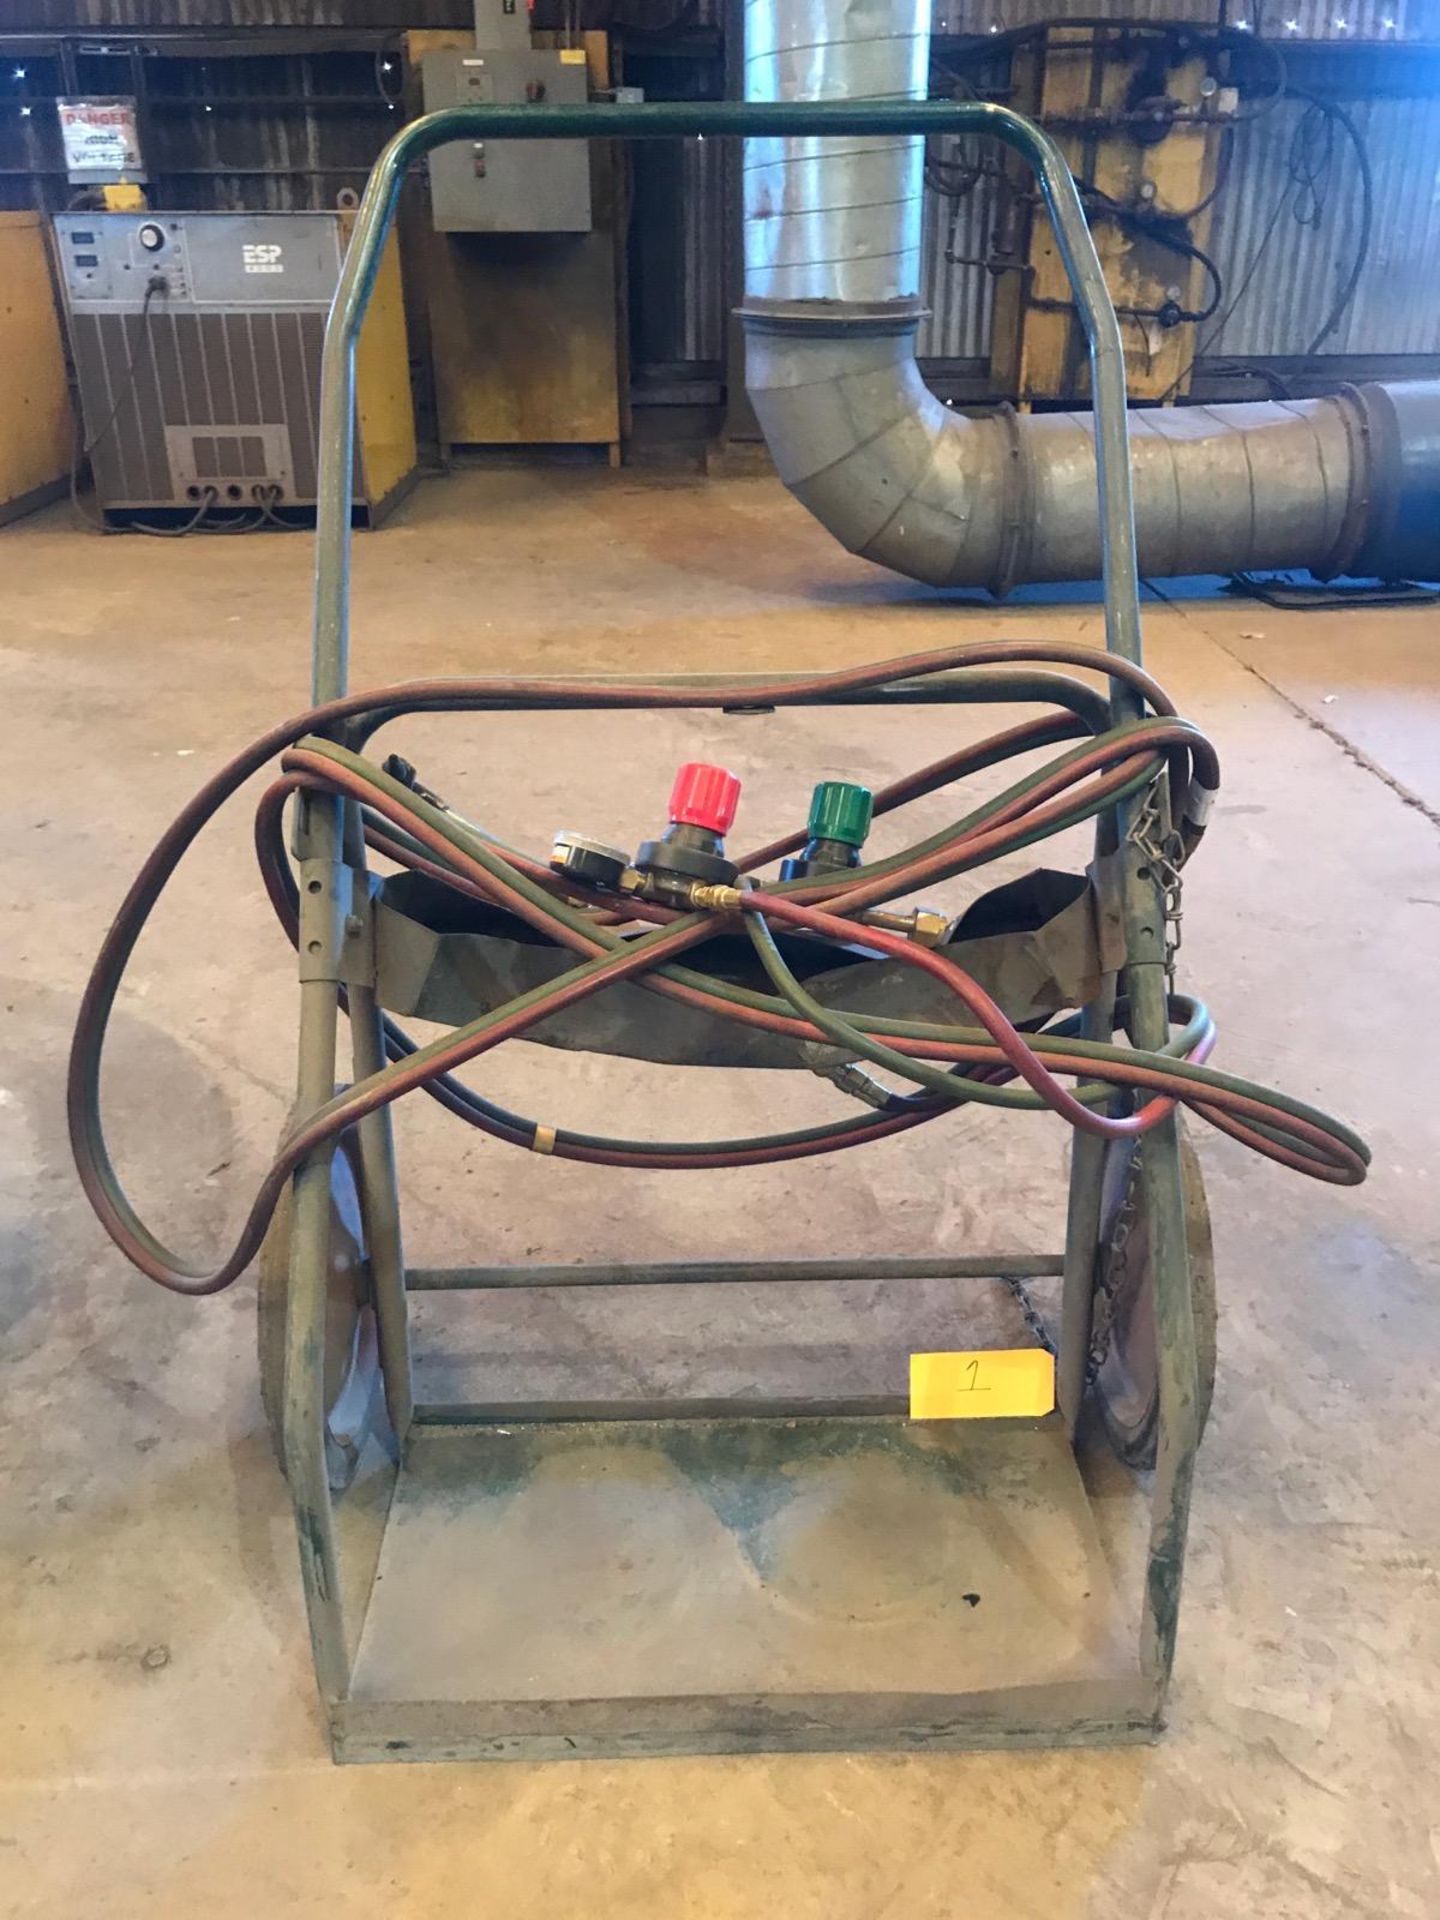 Oxygen/Acetylene Torch Set w/ Cart [Located at 8830 Vineyard Avenue, Rancho Cucamonga, CA 91730]